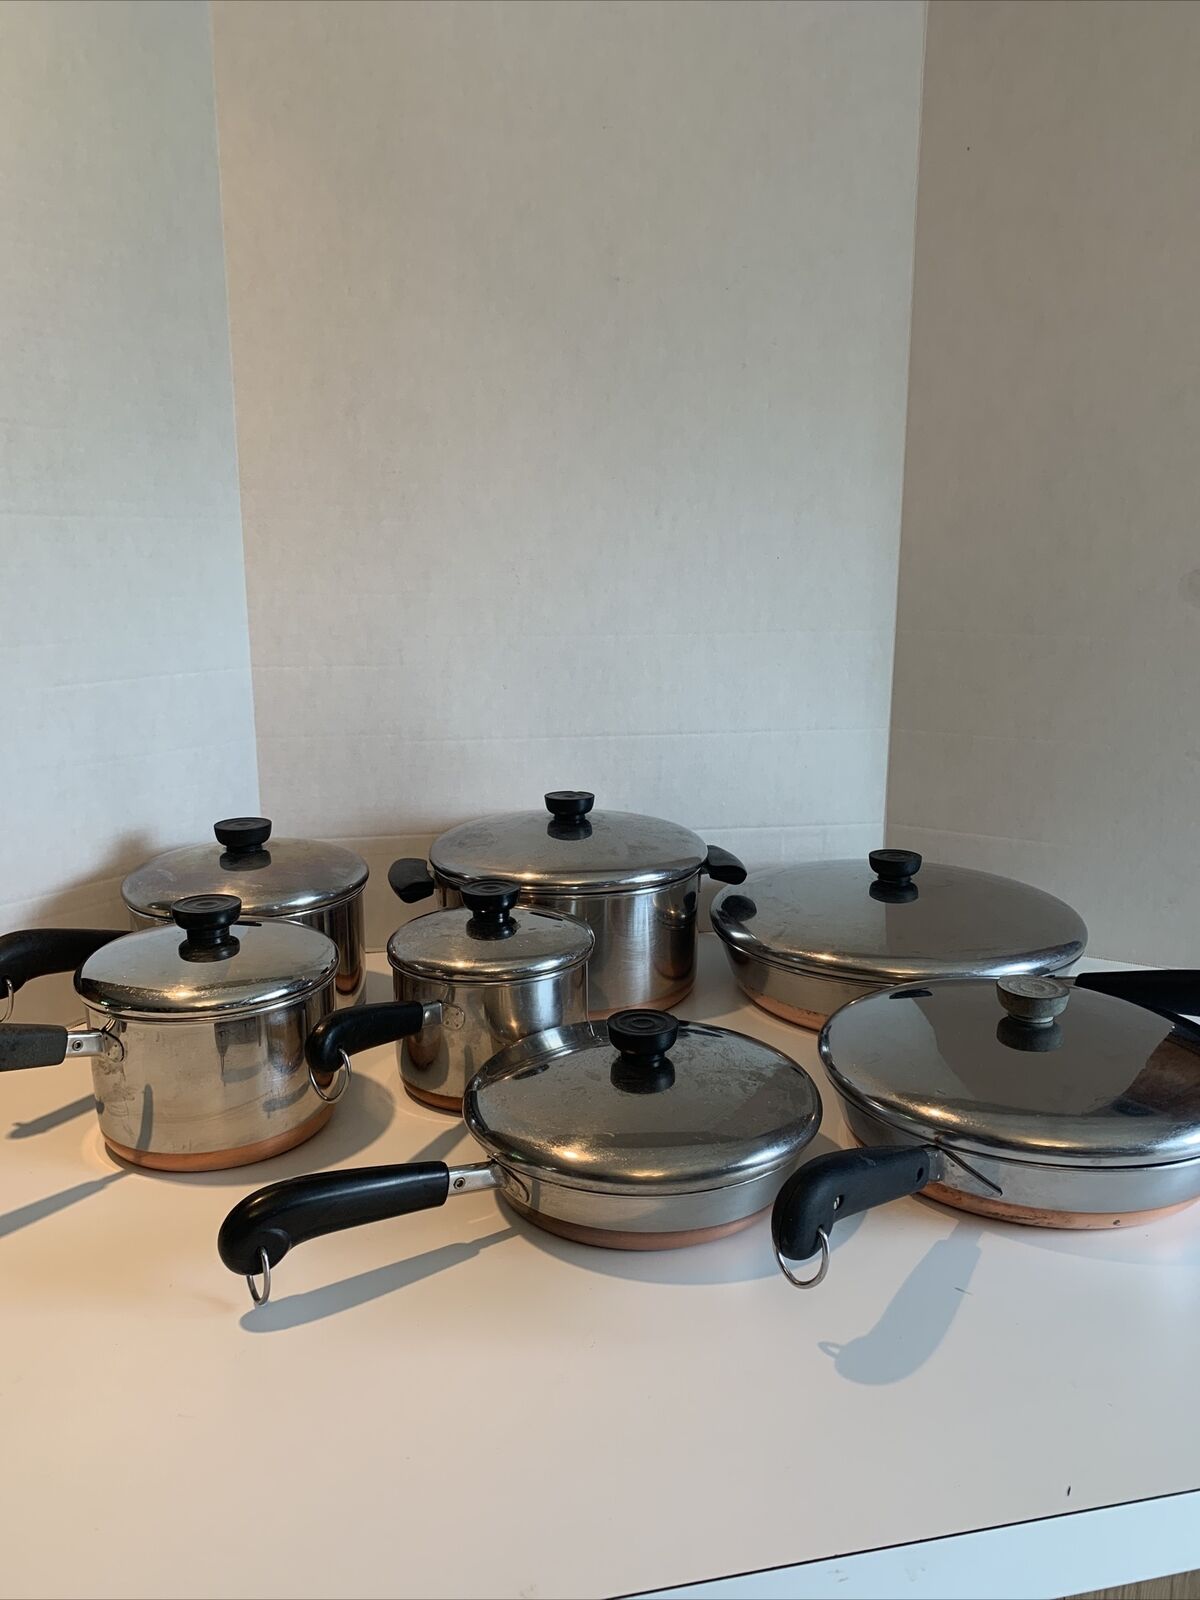 VTG Revere Ware Copper Ware Stainless Steel 14- Piece Cookware Set